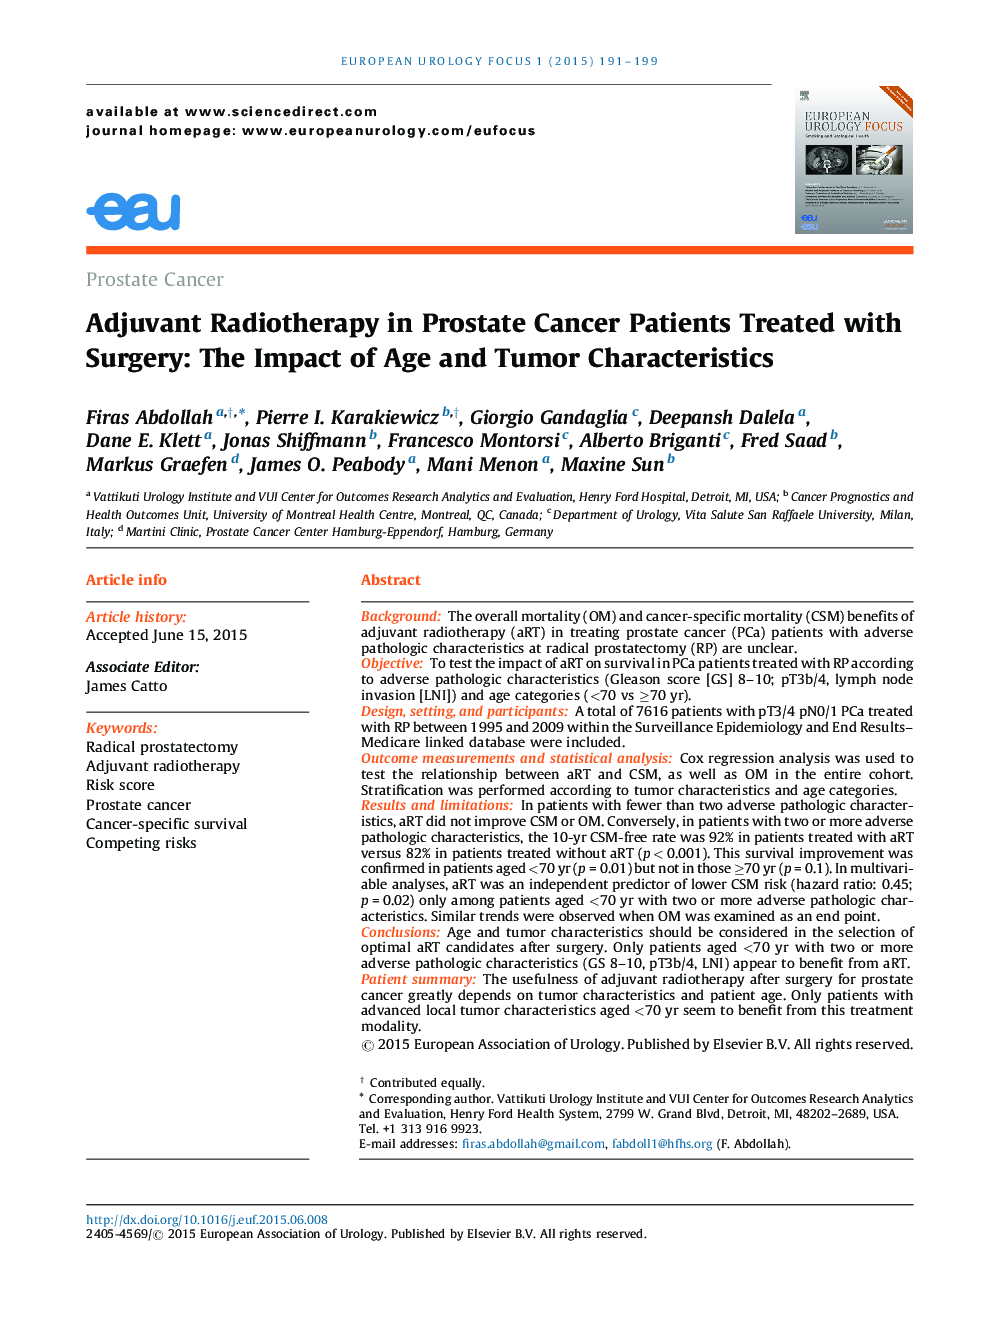 Adjuvant Radiotherapy in Prostate Cancer Patients Treated with Surgery: The Impact of Age and Tumor Characteristics